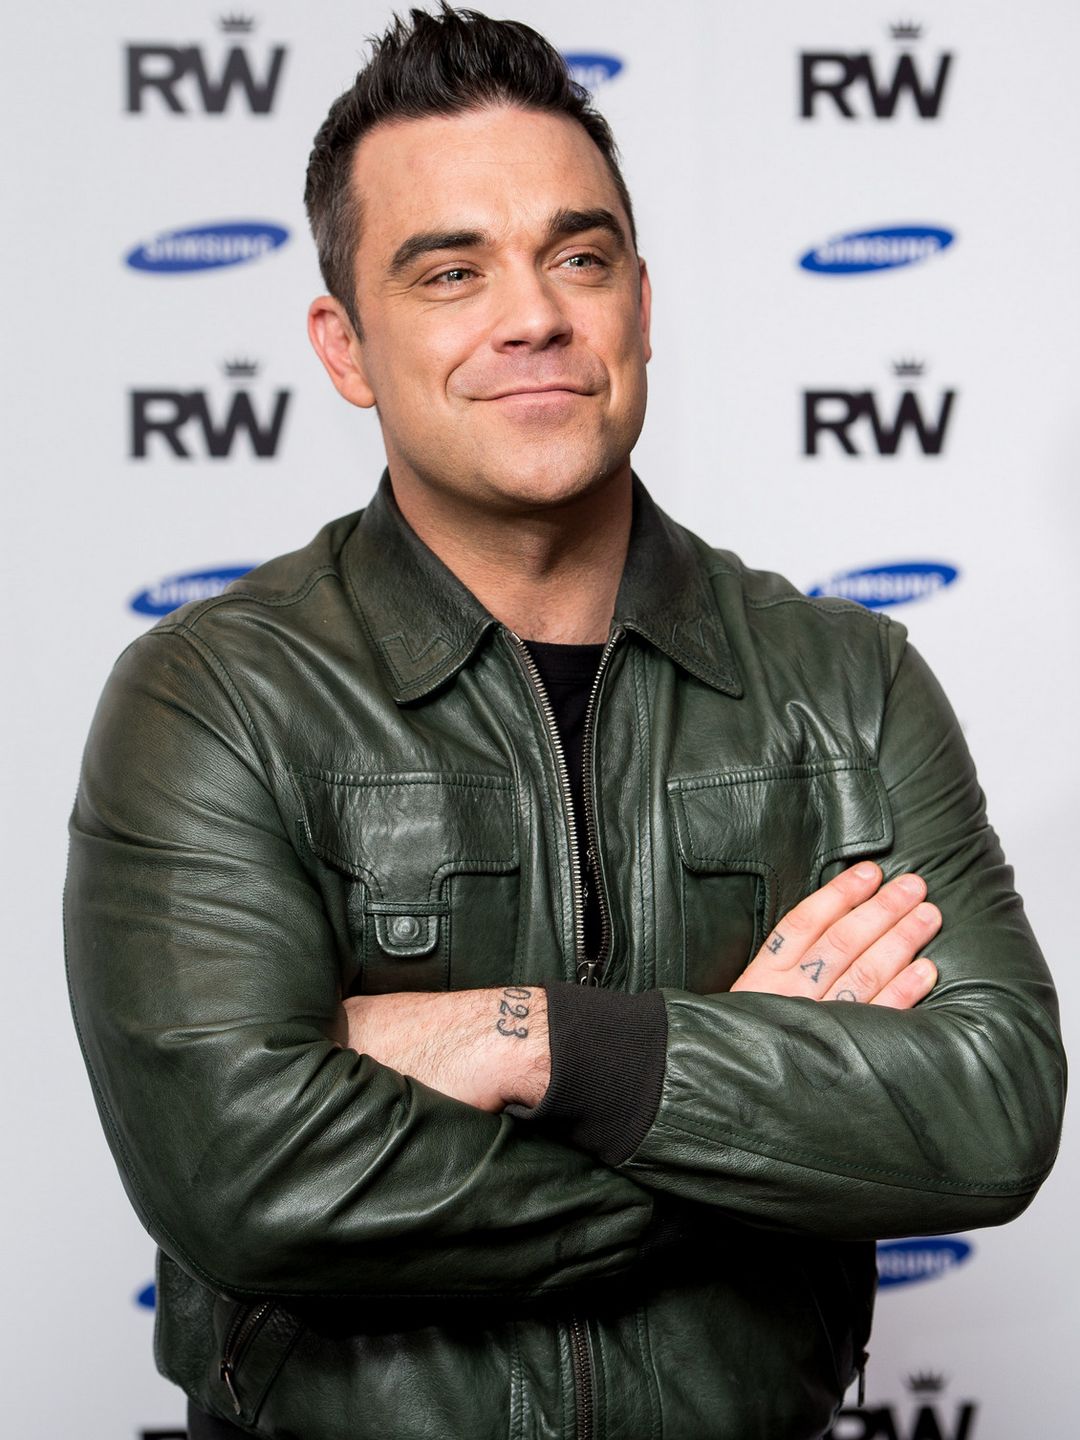 Robbie Williams early life